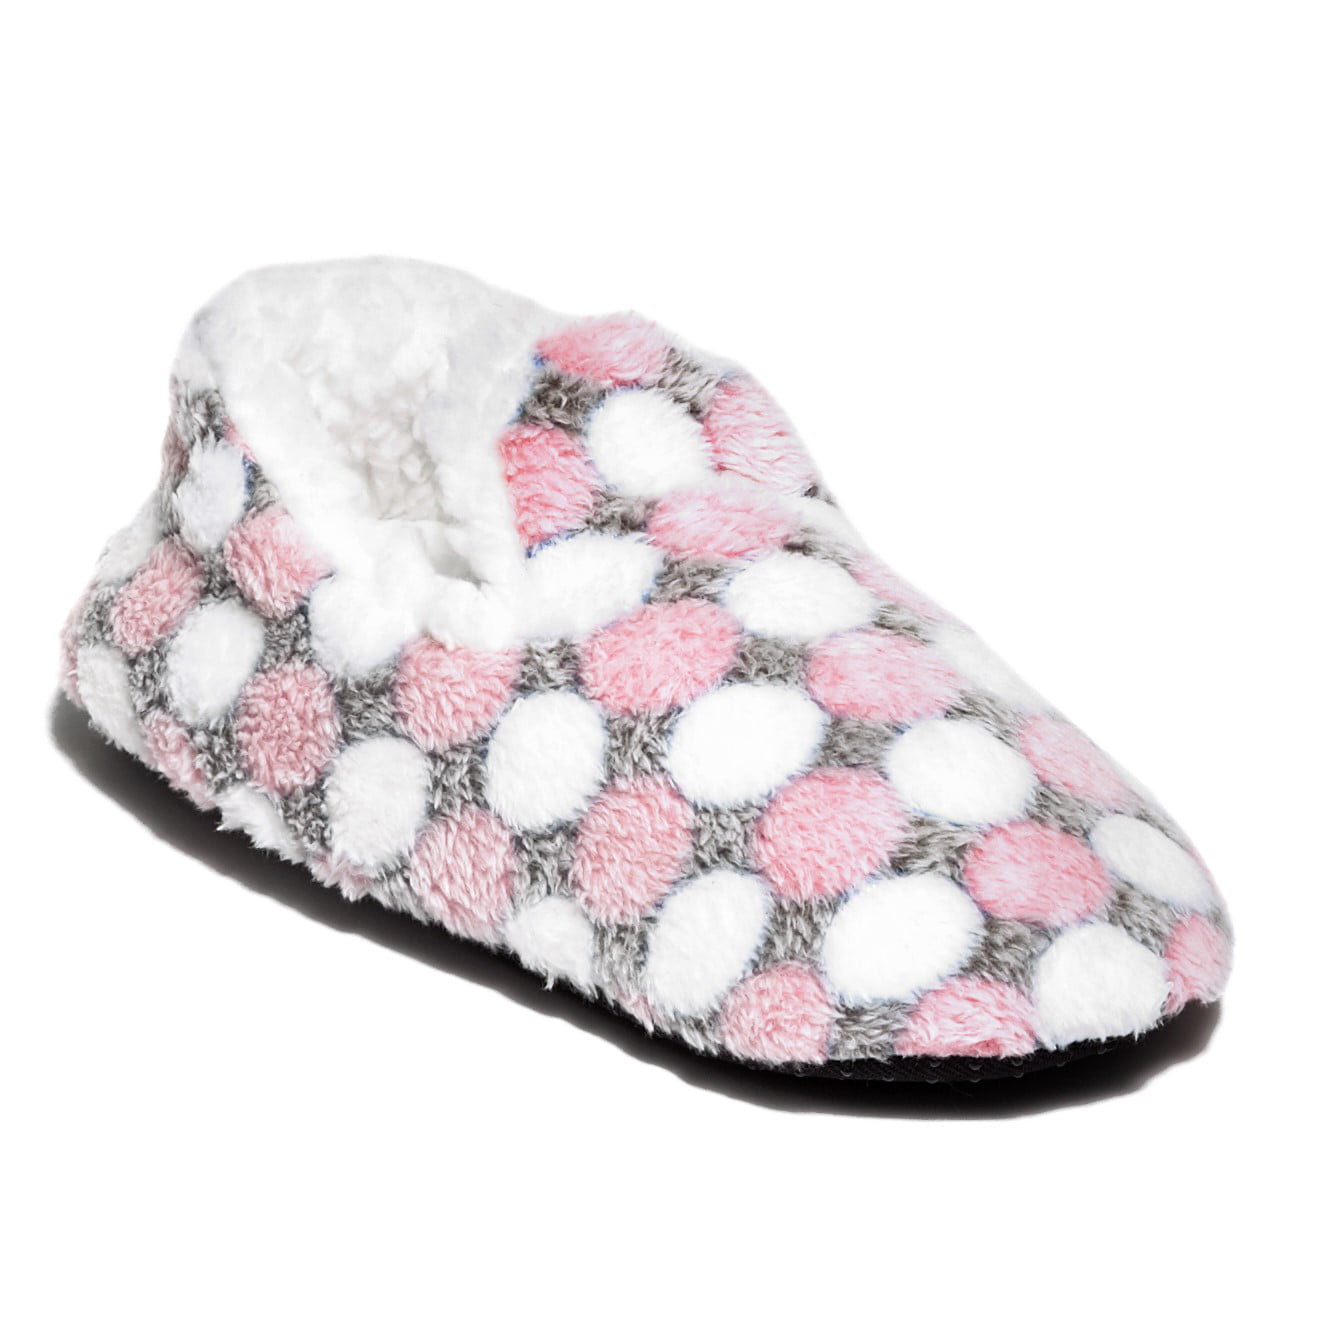 Indoor Mule Brown Stripe Pink Hearts Women Polka Dot Cosy Home Slippers Non Slip 